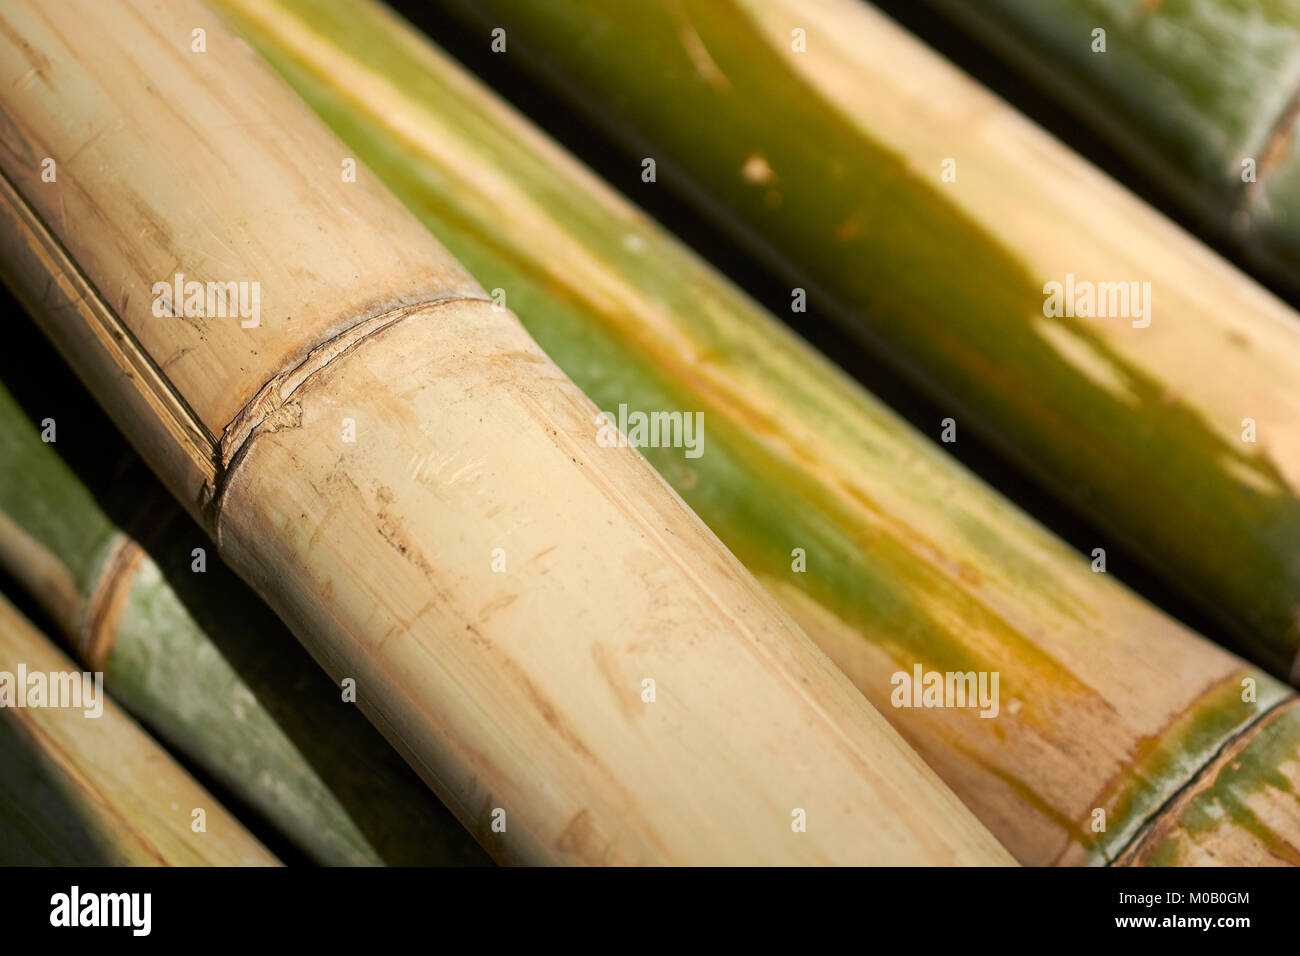 Bamboo trunks laid out for use as a building material, Chiang Mai, Thailand Stock Photo